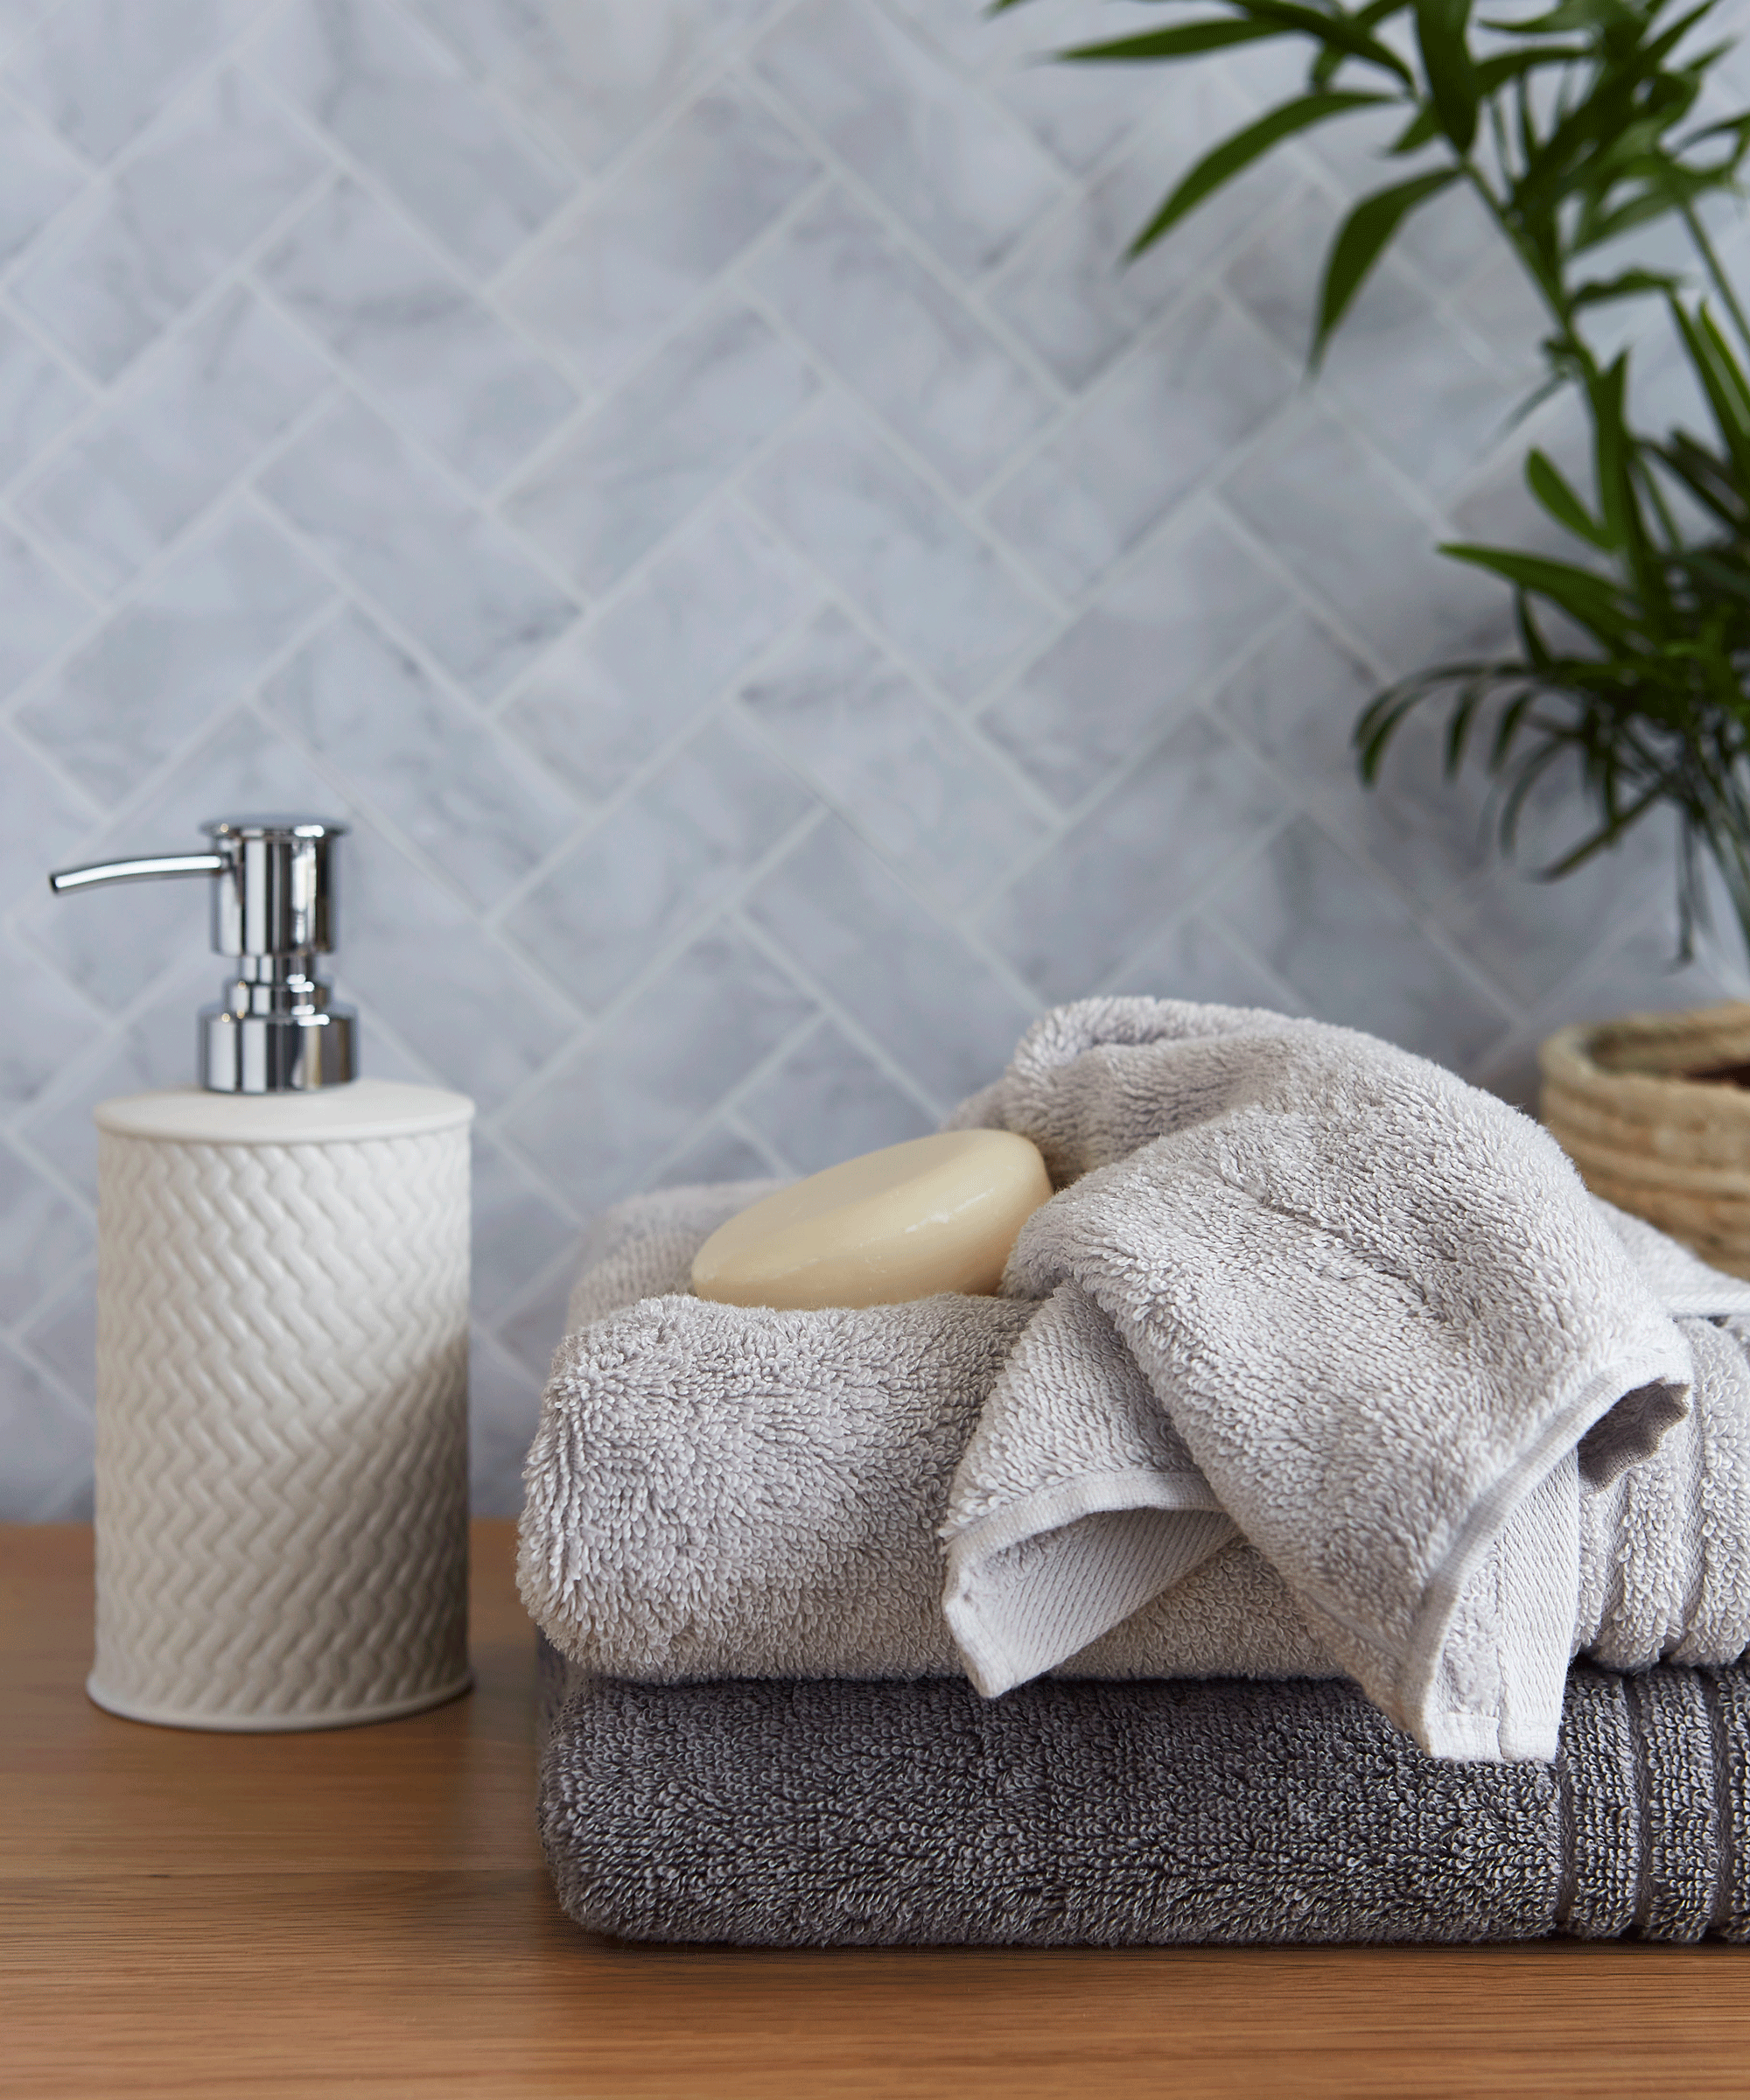 Dunelm towels and soap dispenser in a grey tiled bathroom